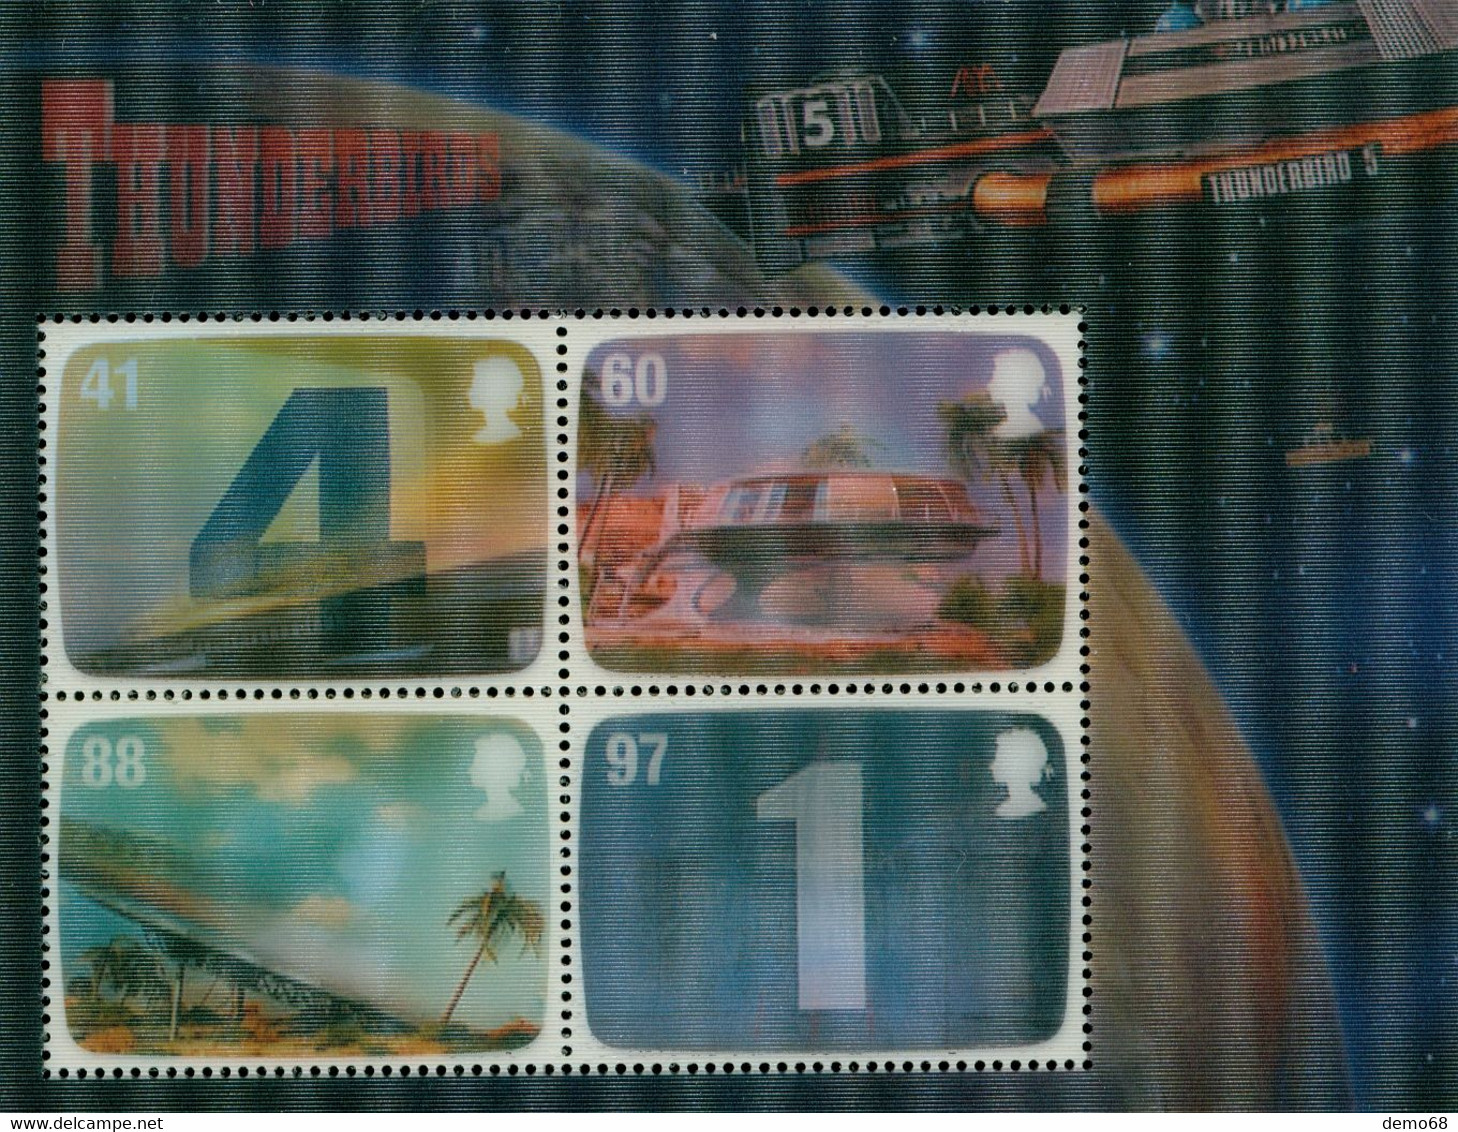 Stamp Timbre England Great Britain  Thunderbirds Gerry Anderson GB Feuillet Neuf 4 Et 6 Timbre S Royal Mail Mint Stamps - Sammlungen